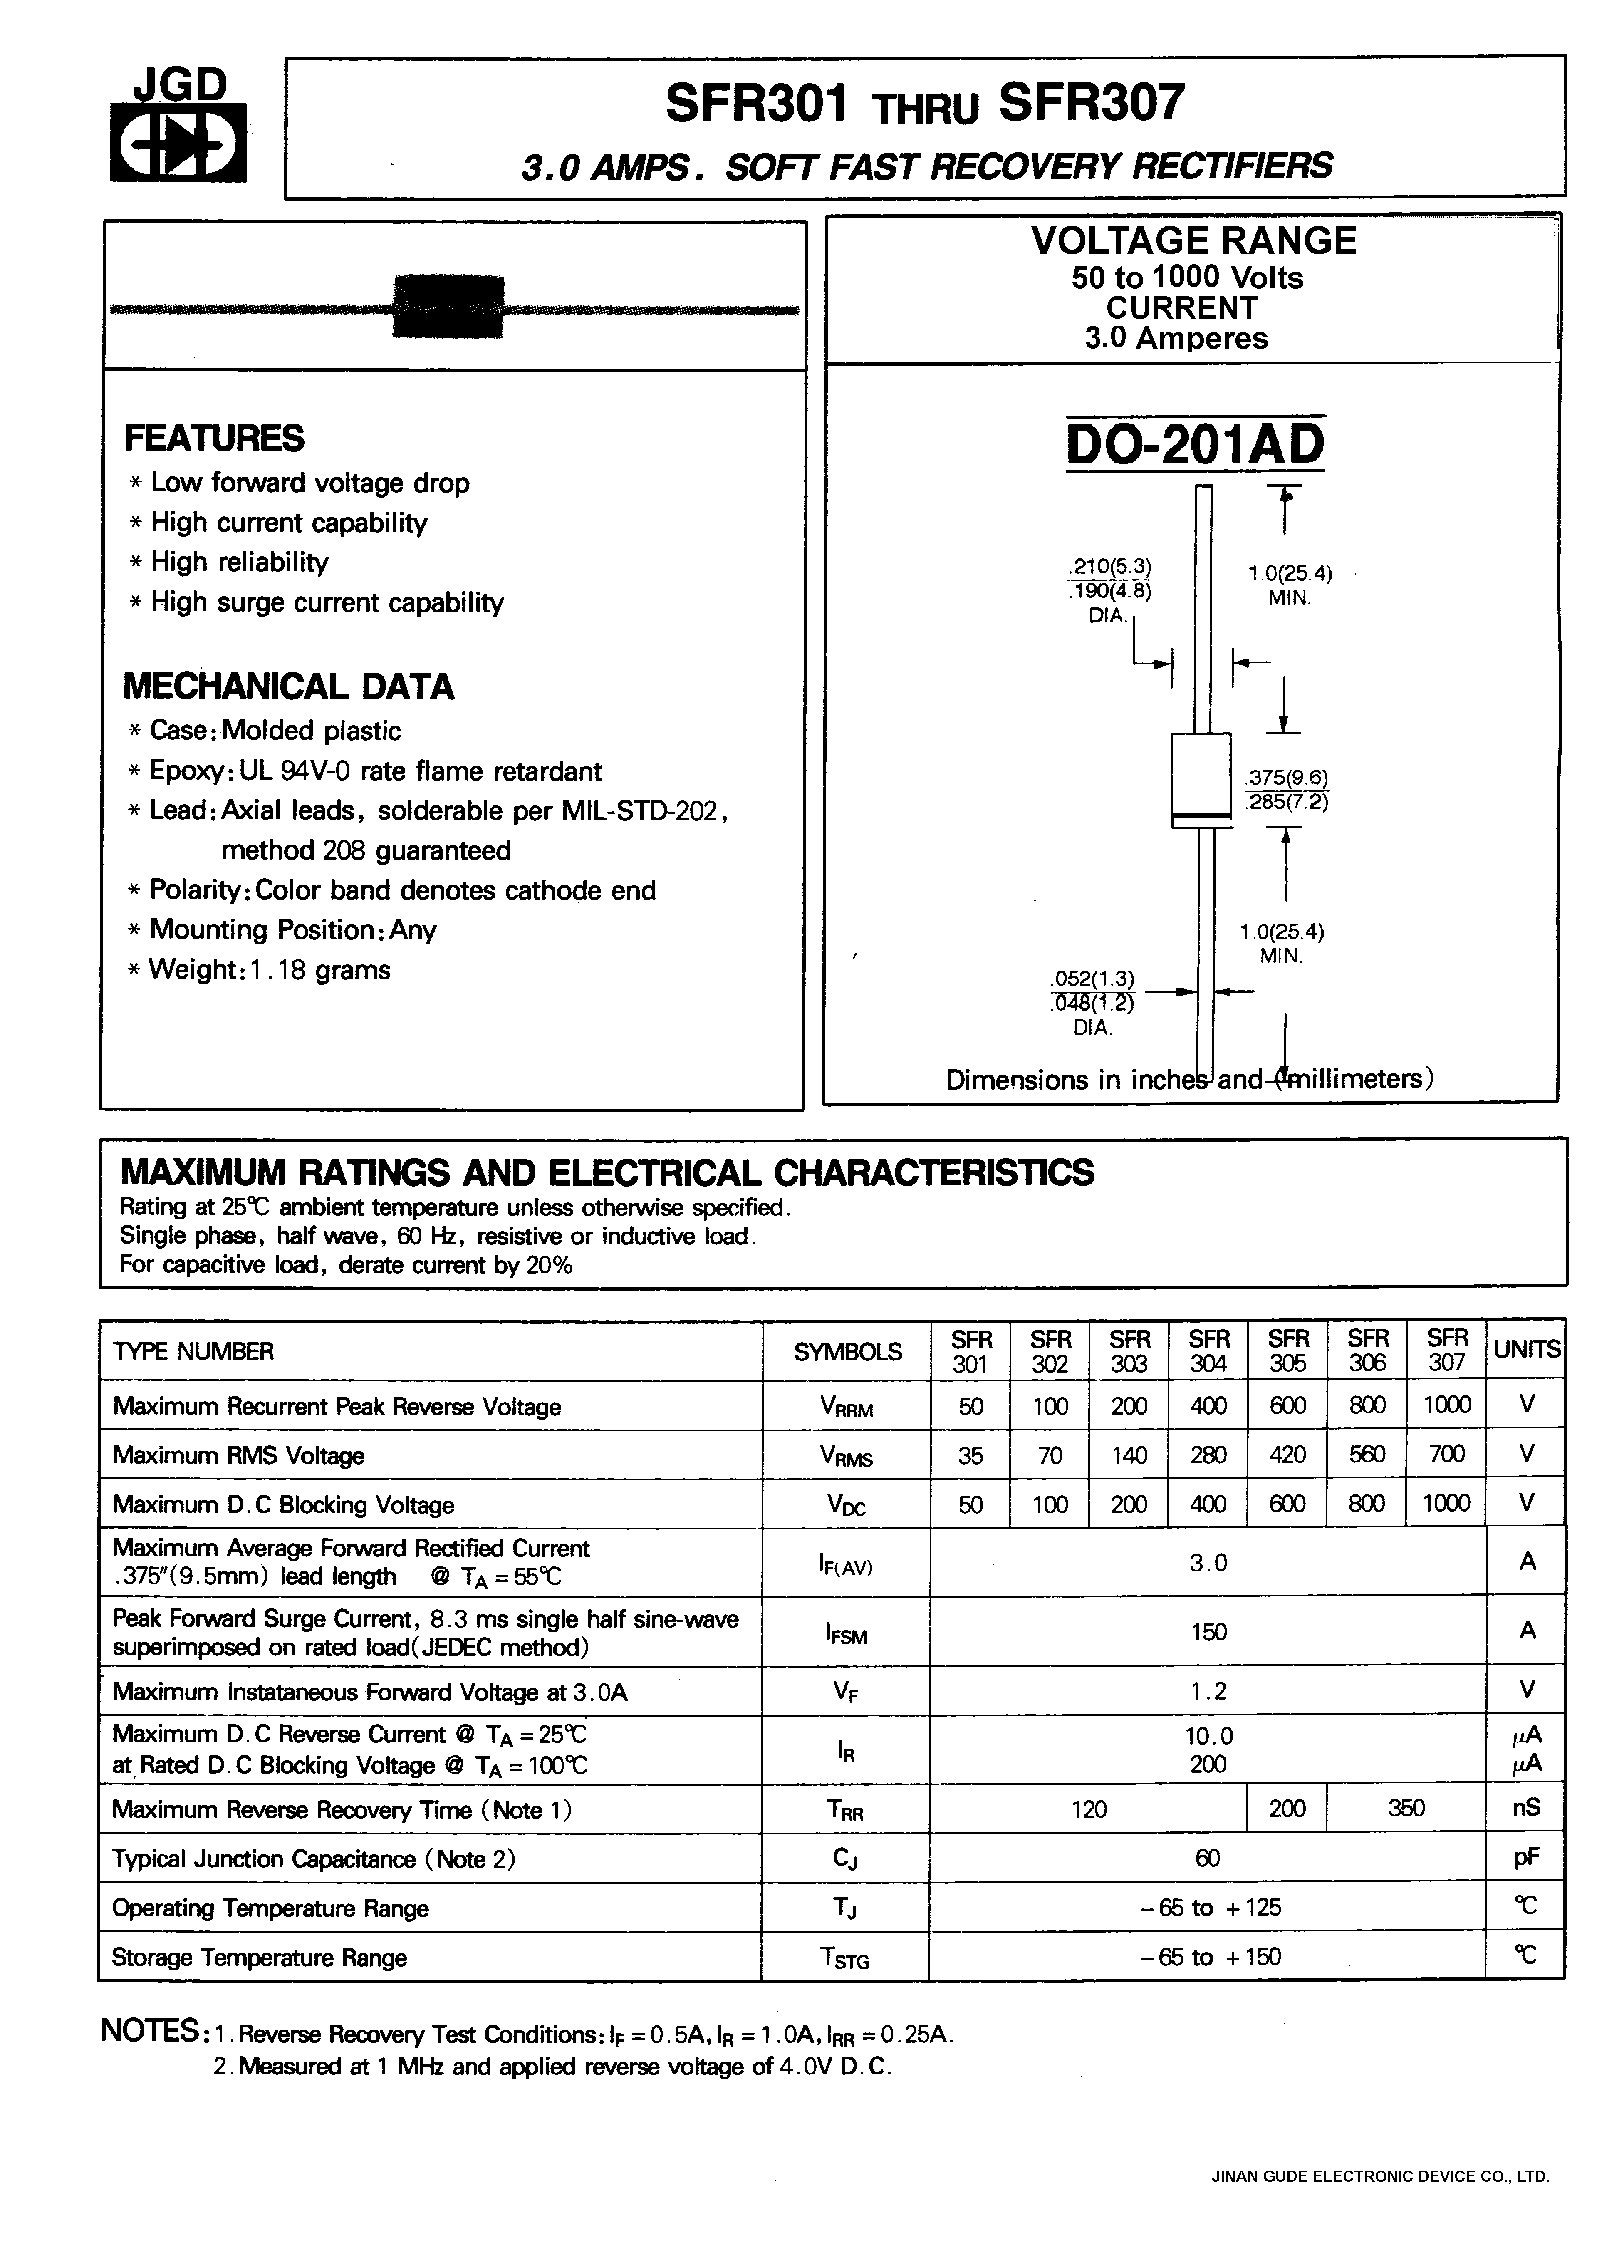 Datasheet SFR306 - 3.0 AMPS. SOFT FAST RECOVERY RECTIFIERS page 1